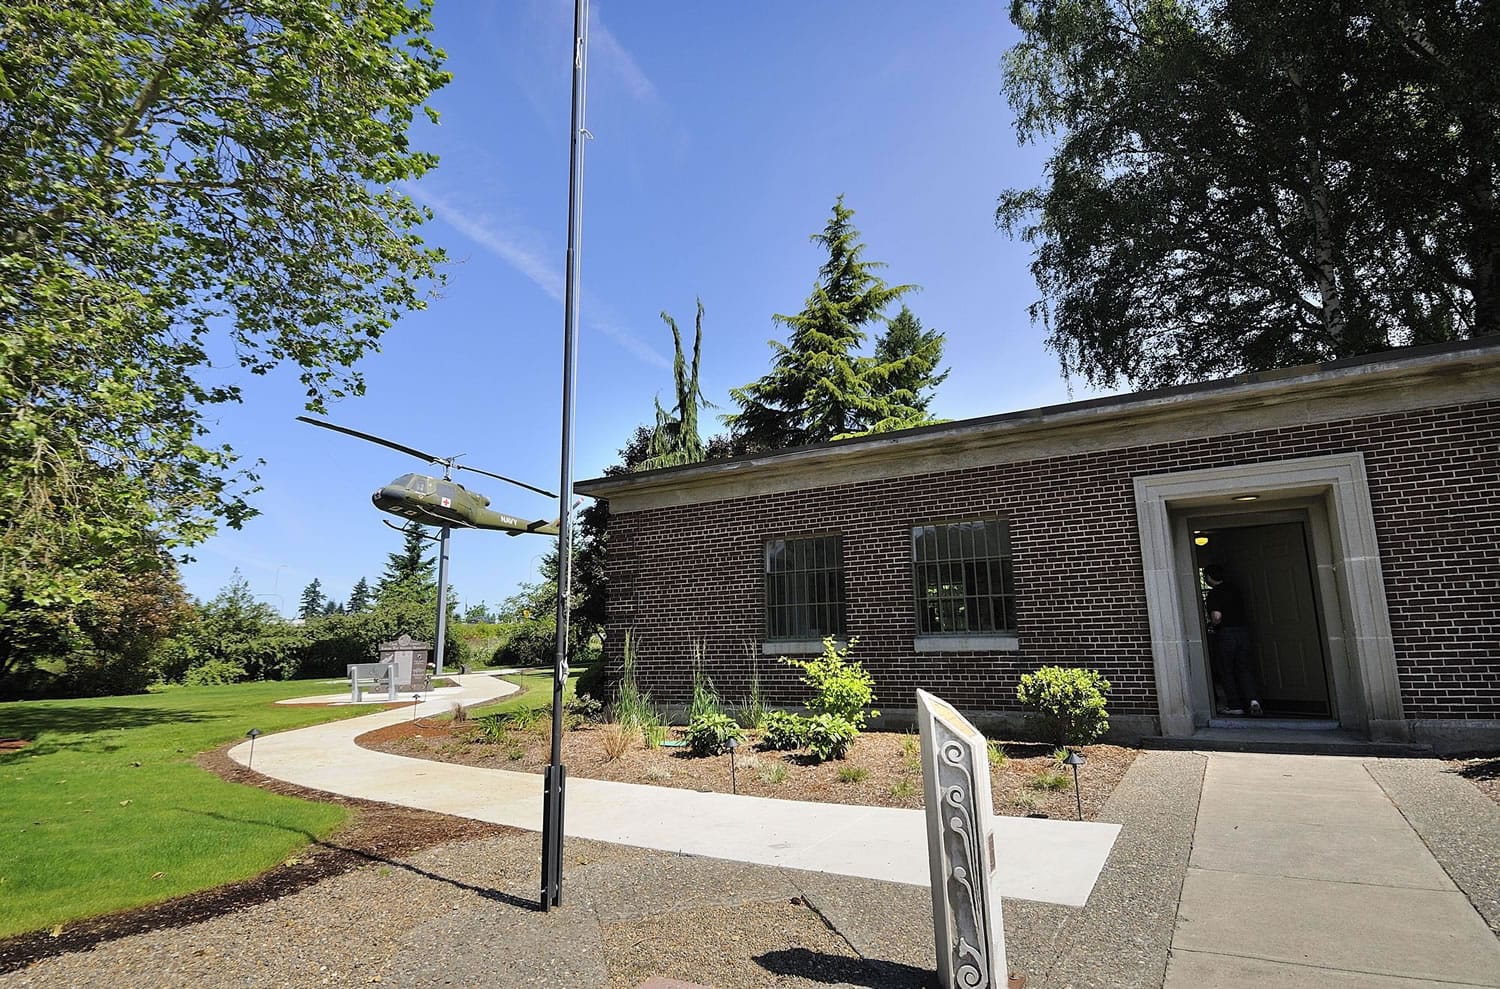 A World War II-era building on Vancouver's Veterans Affairs campus has been converted into a museum.